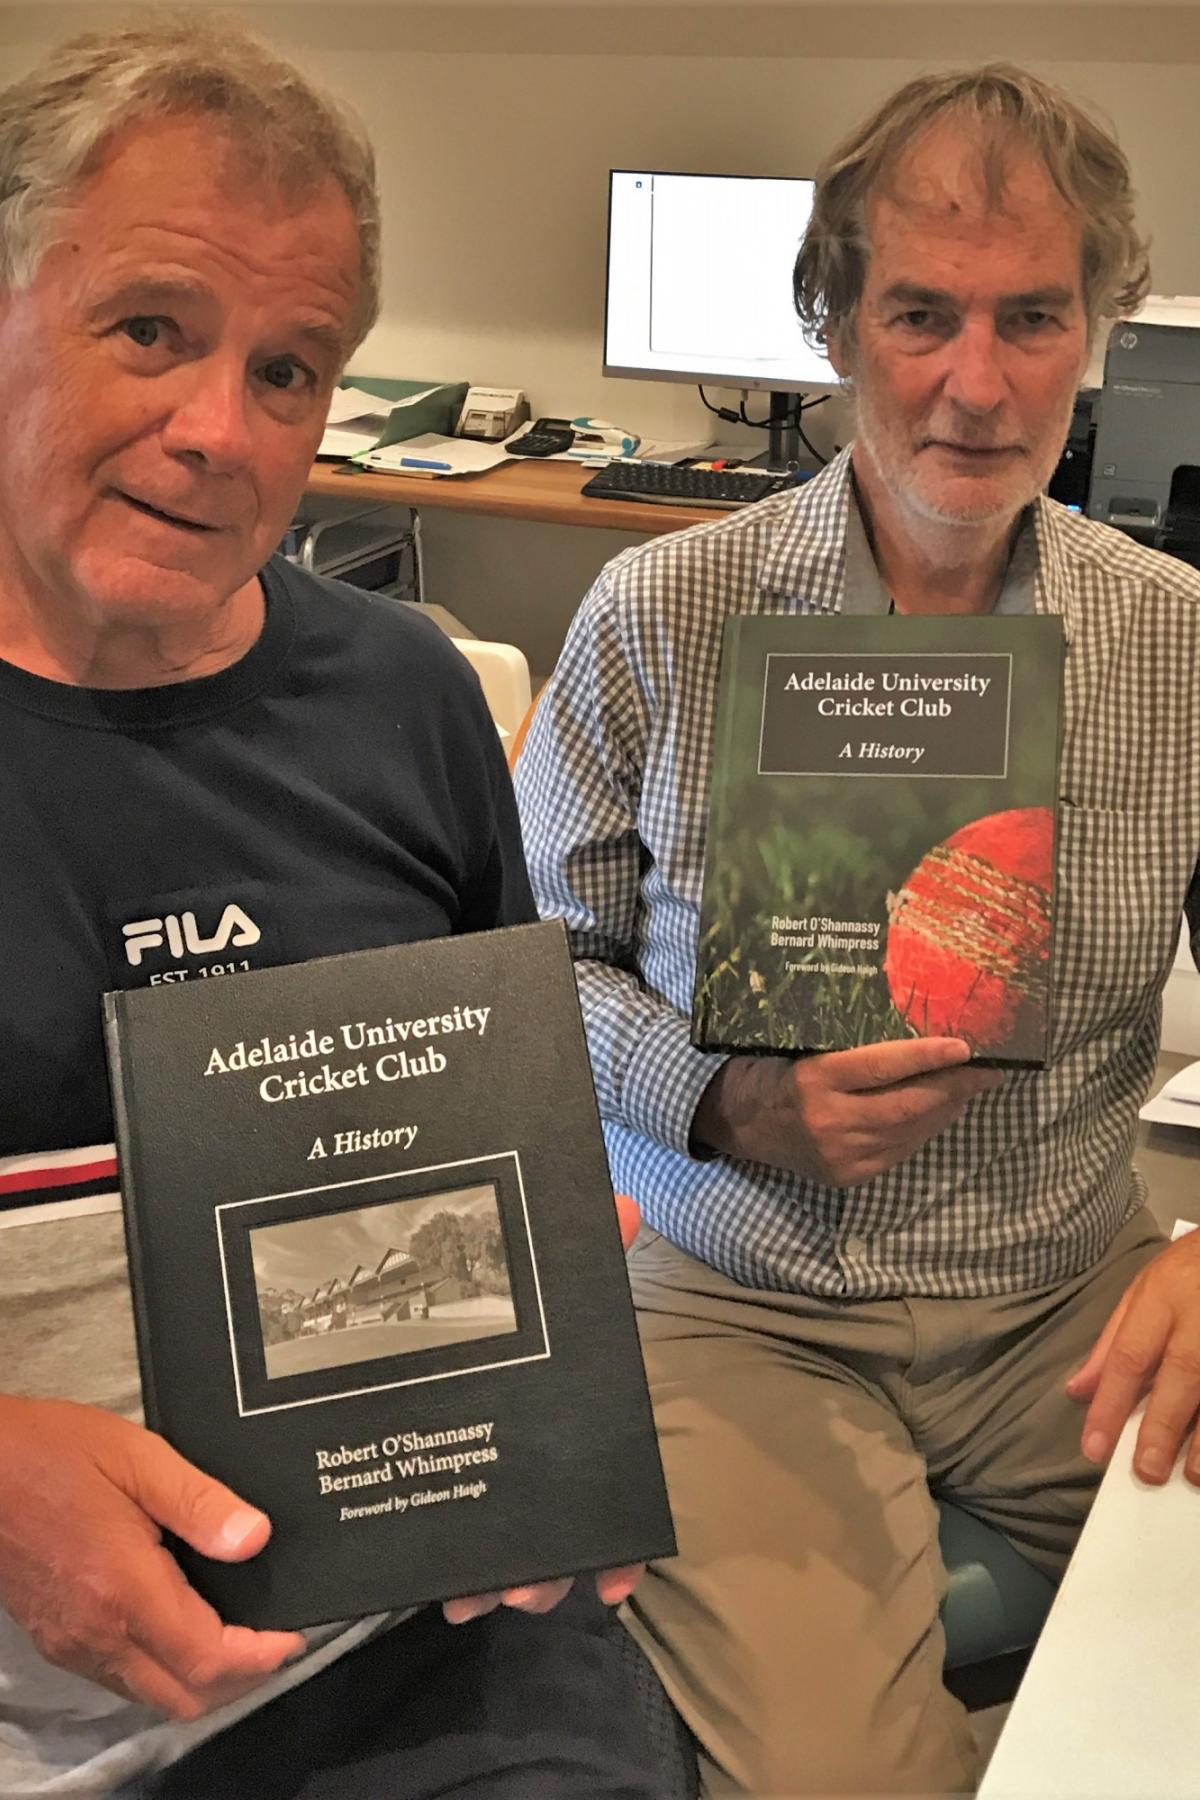 Authors, Robert O'Shannassy and Bernard Whimpress sitting next to each other and holding up books about the cricket club